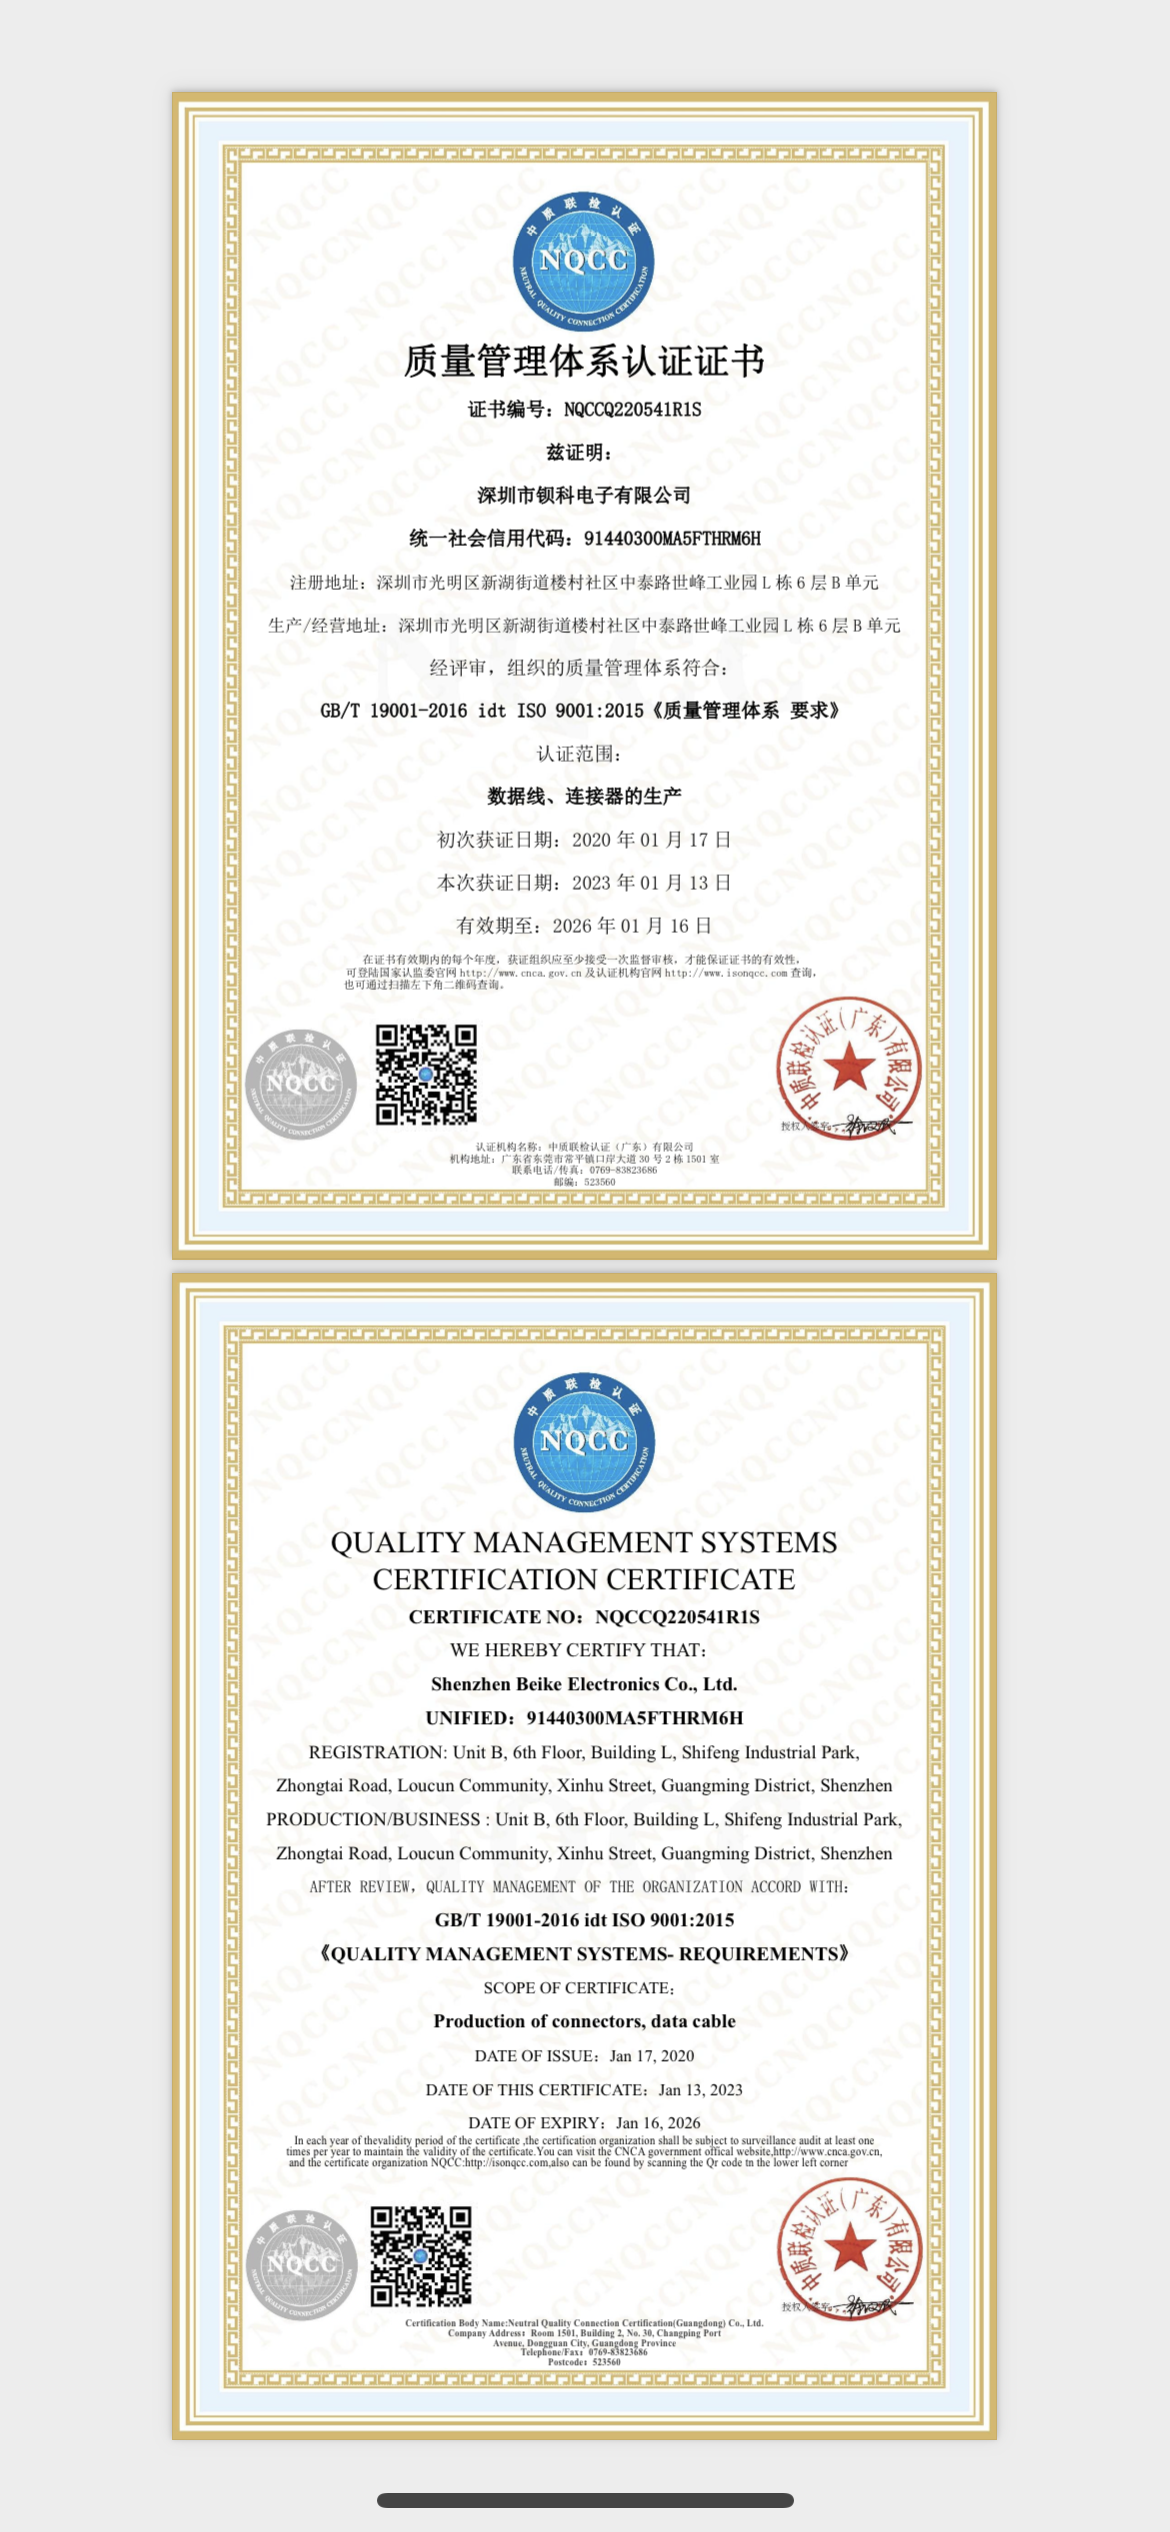 In 2023, Bexkom passed the ISO9001 certification again